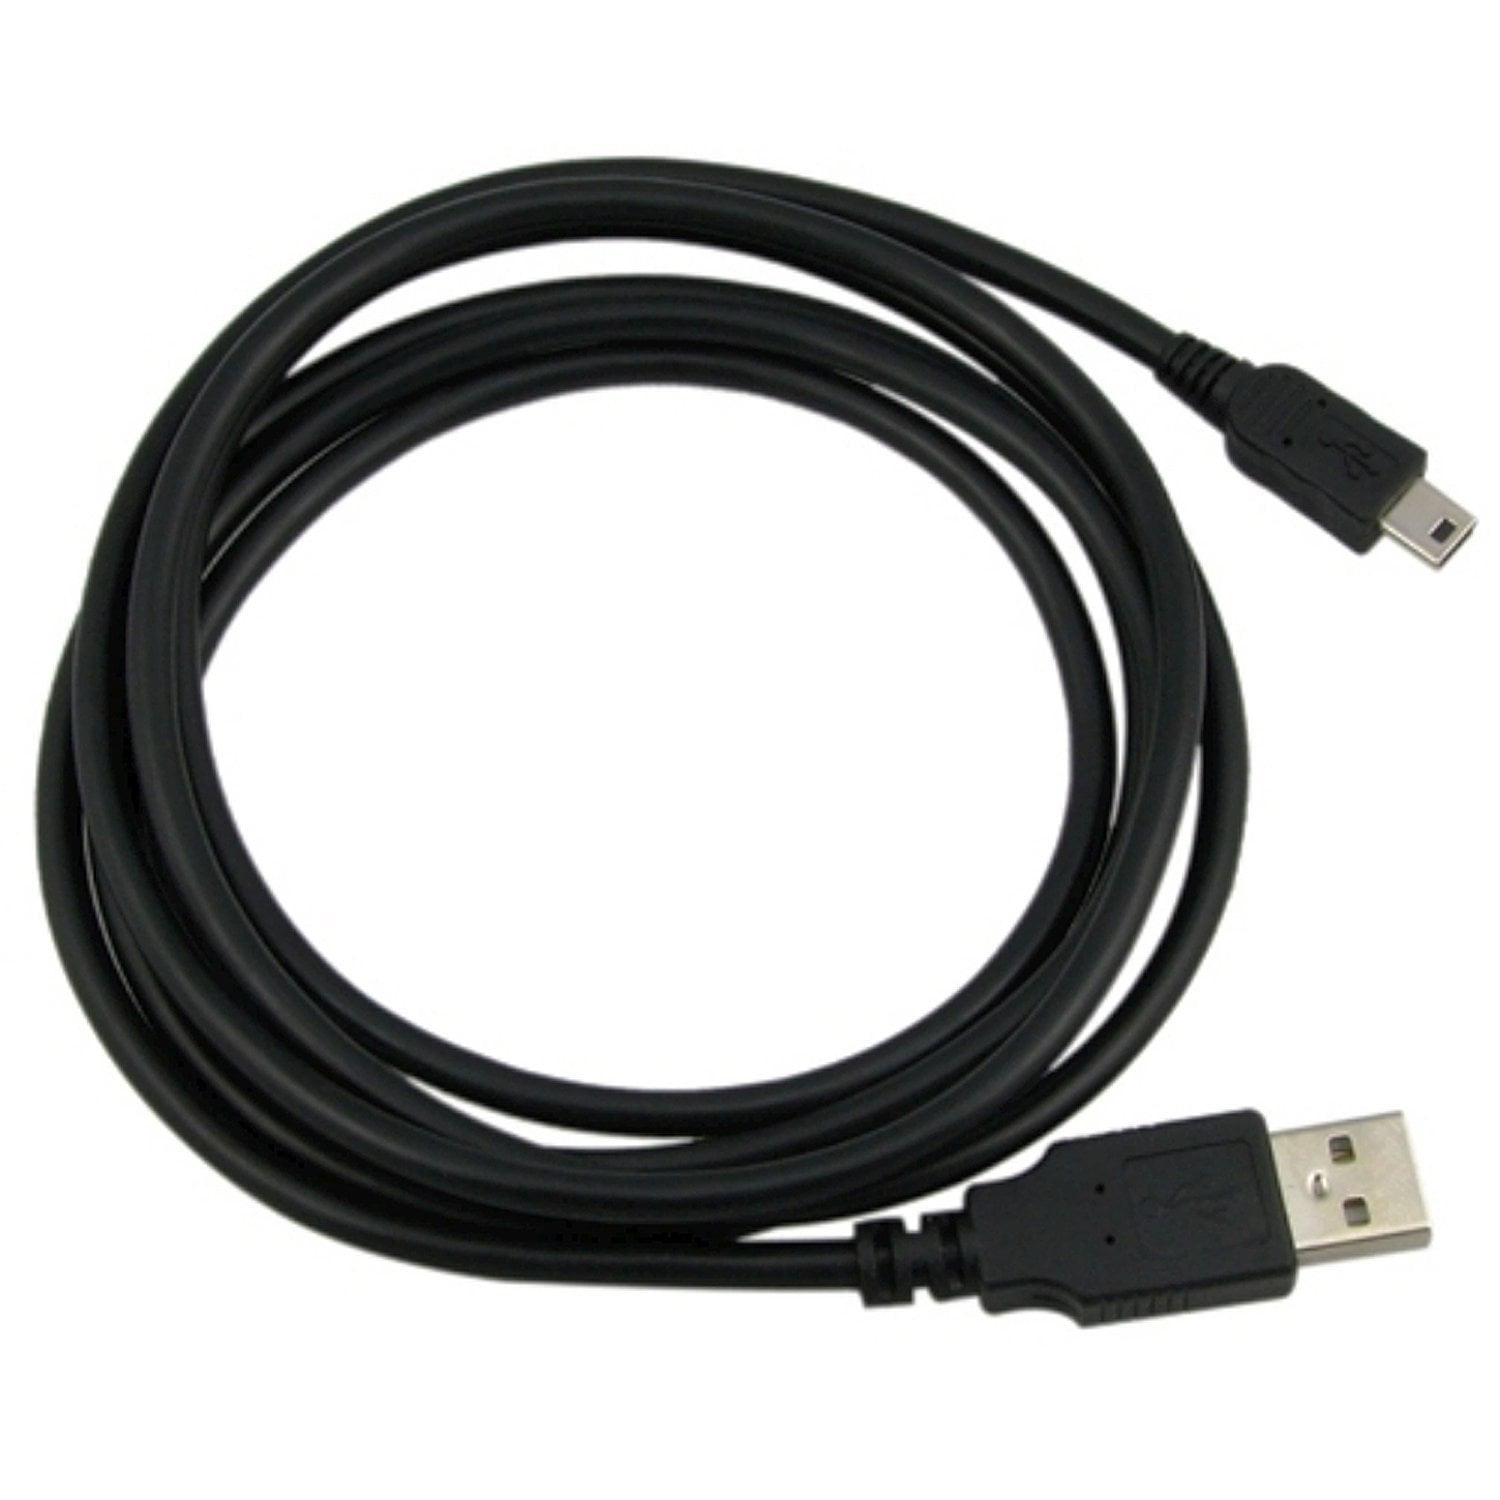 USB 2.0 PC Data Sync Cord Cable for Seagate Freeagent Goflex External Hard Drive 